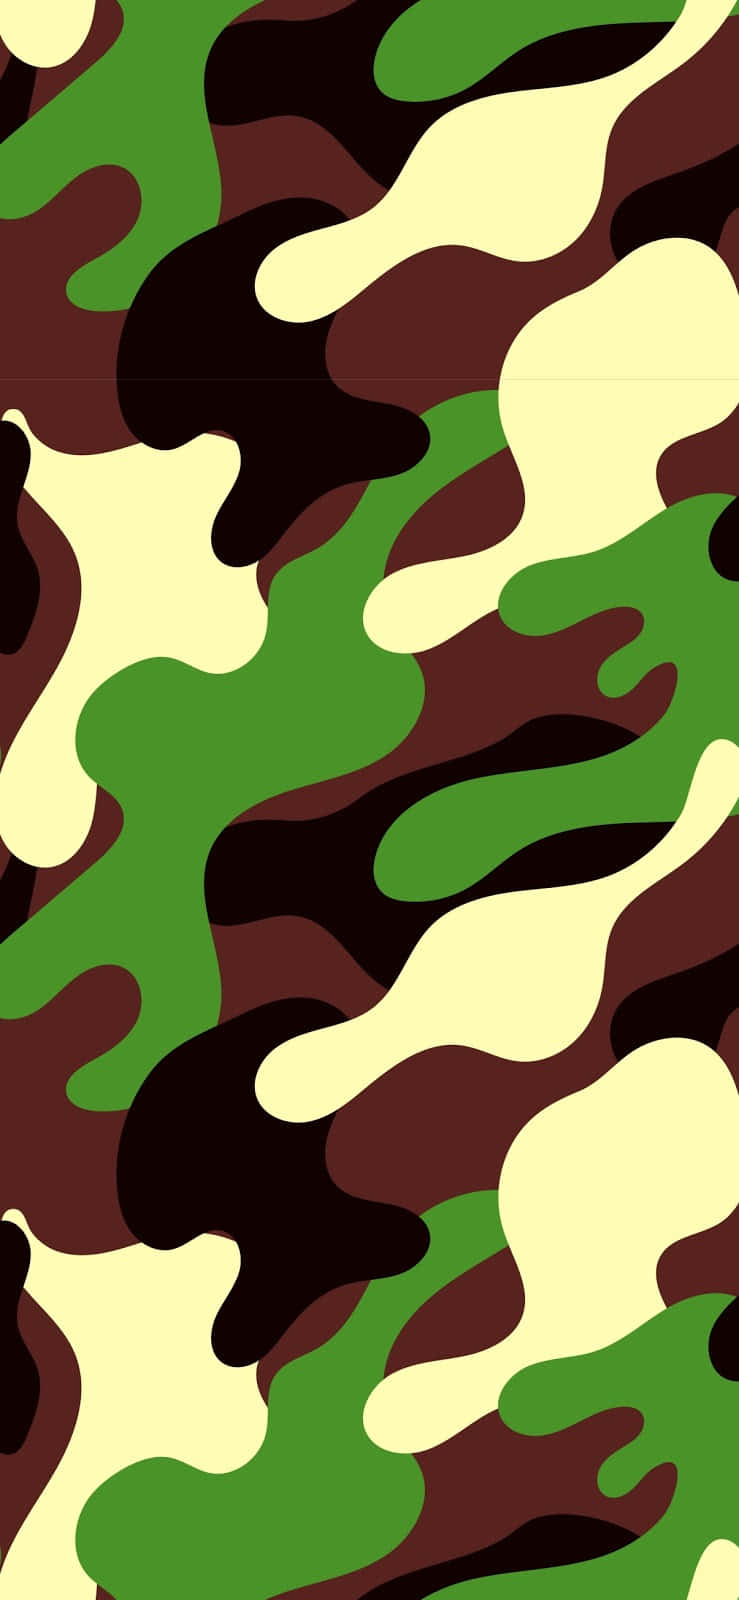 Stay Stealth with Green Camo Wallpaper